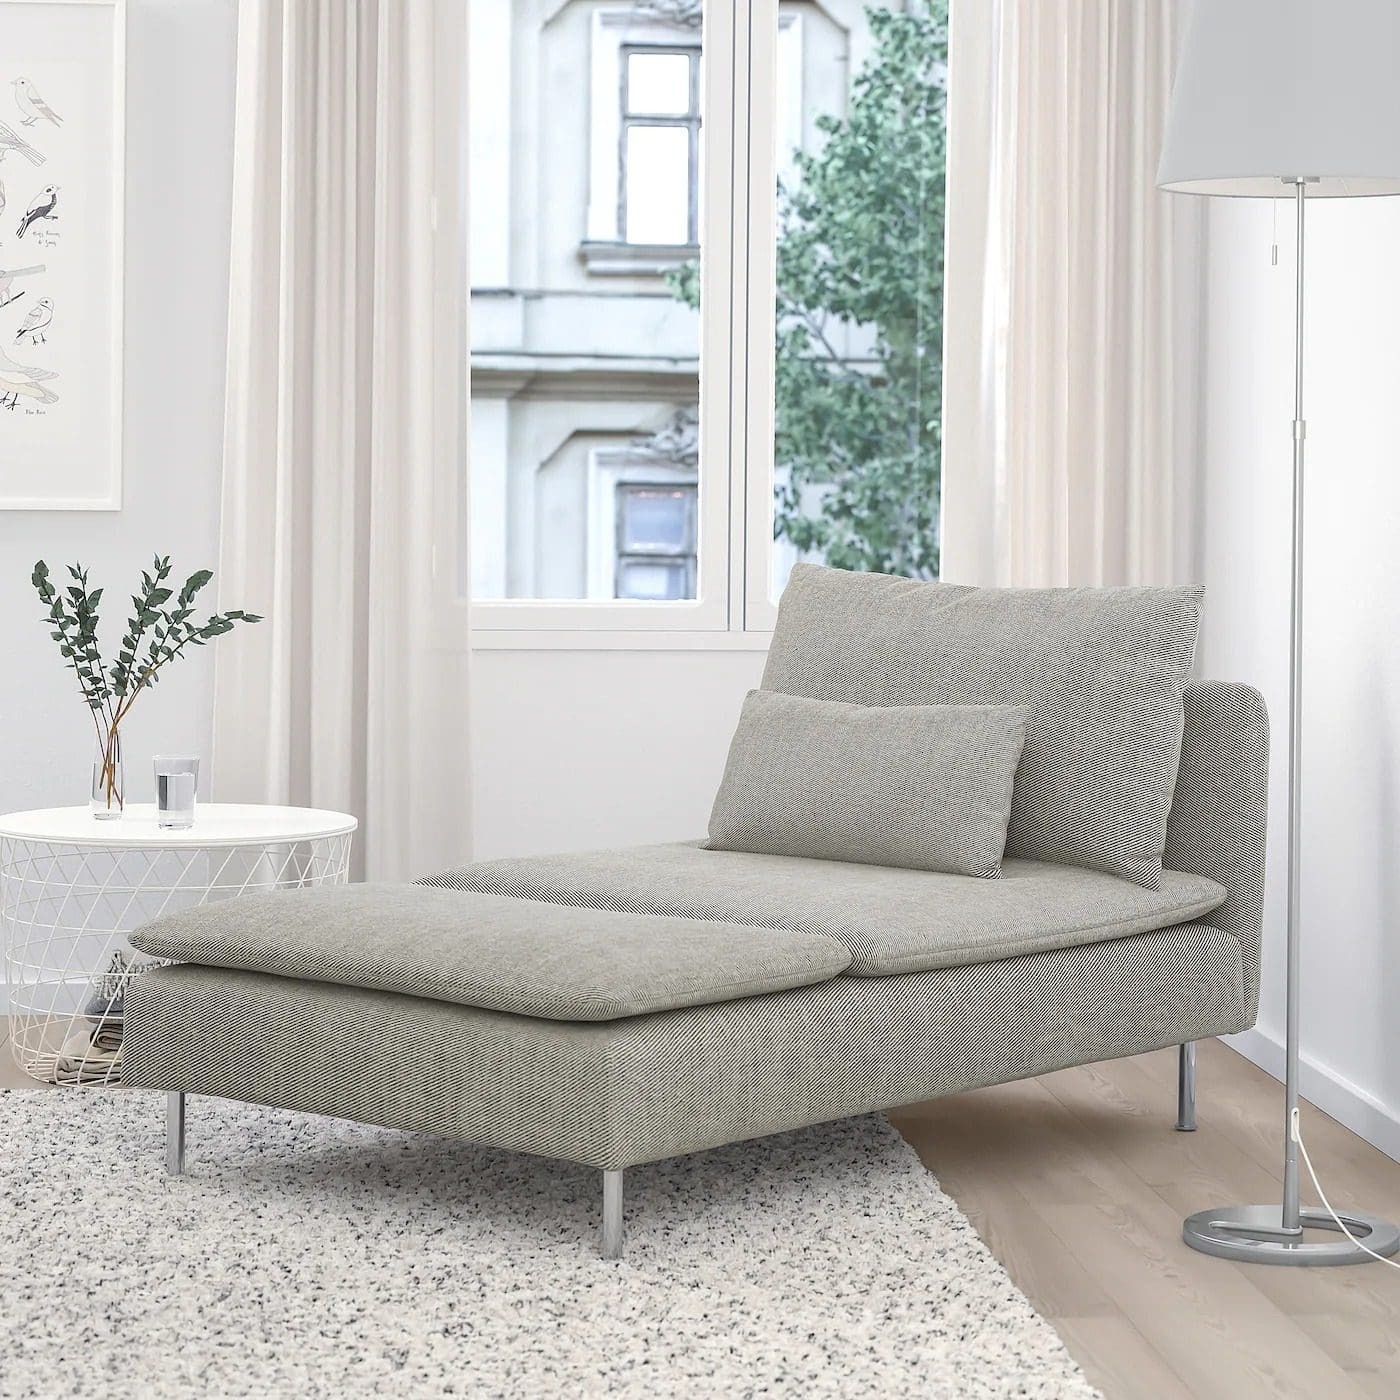 ikea soderham fabric chaise lounge chair in light grey fabric